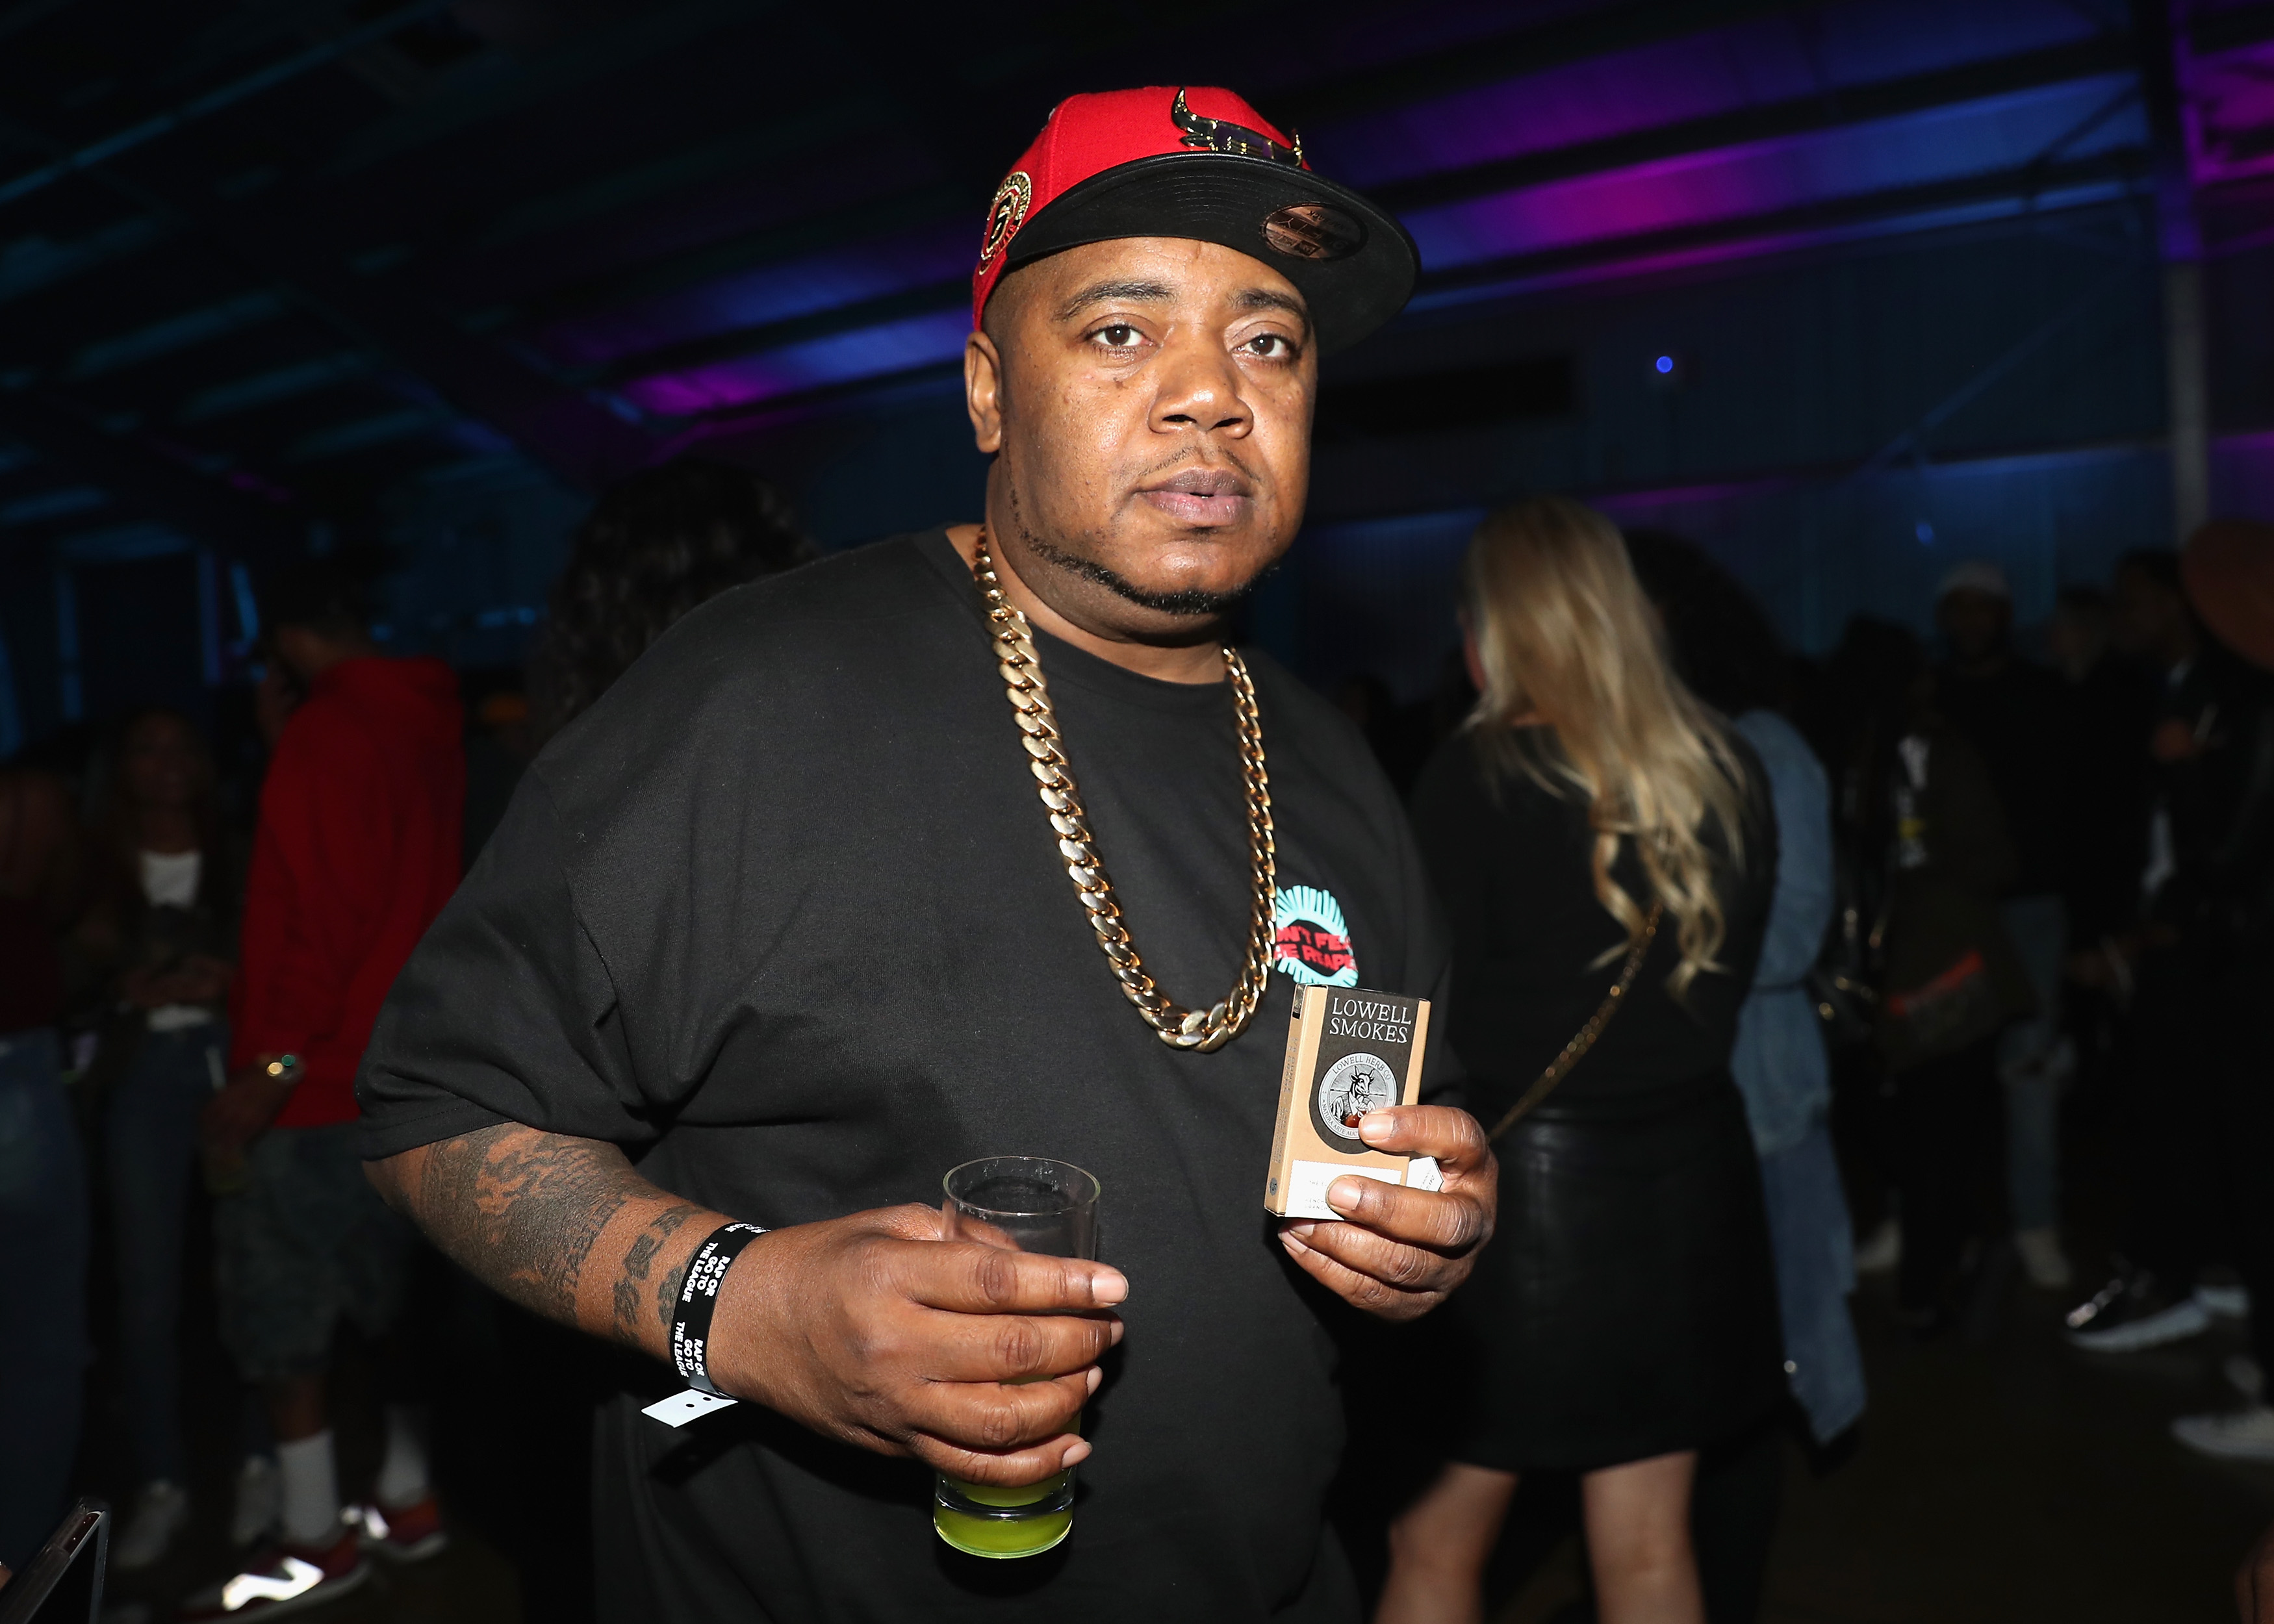 Twista attends the 2 Chainz Hosts NBA All-Star Def Jam End Party